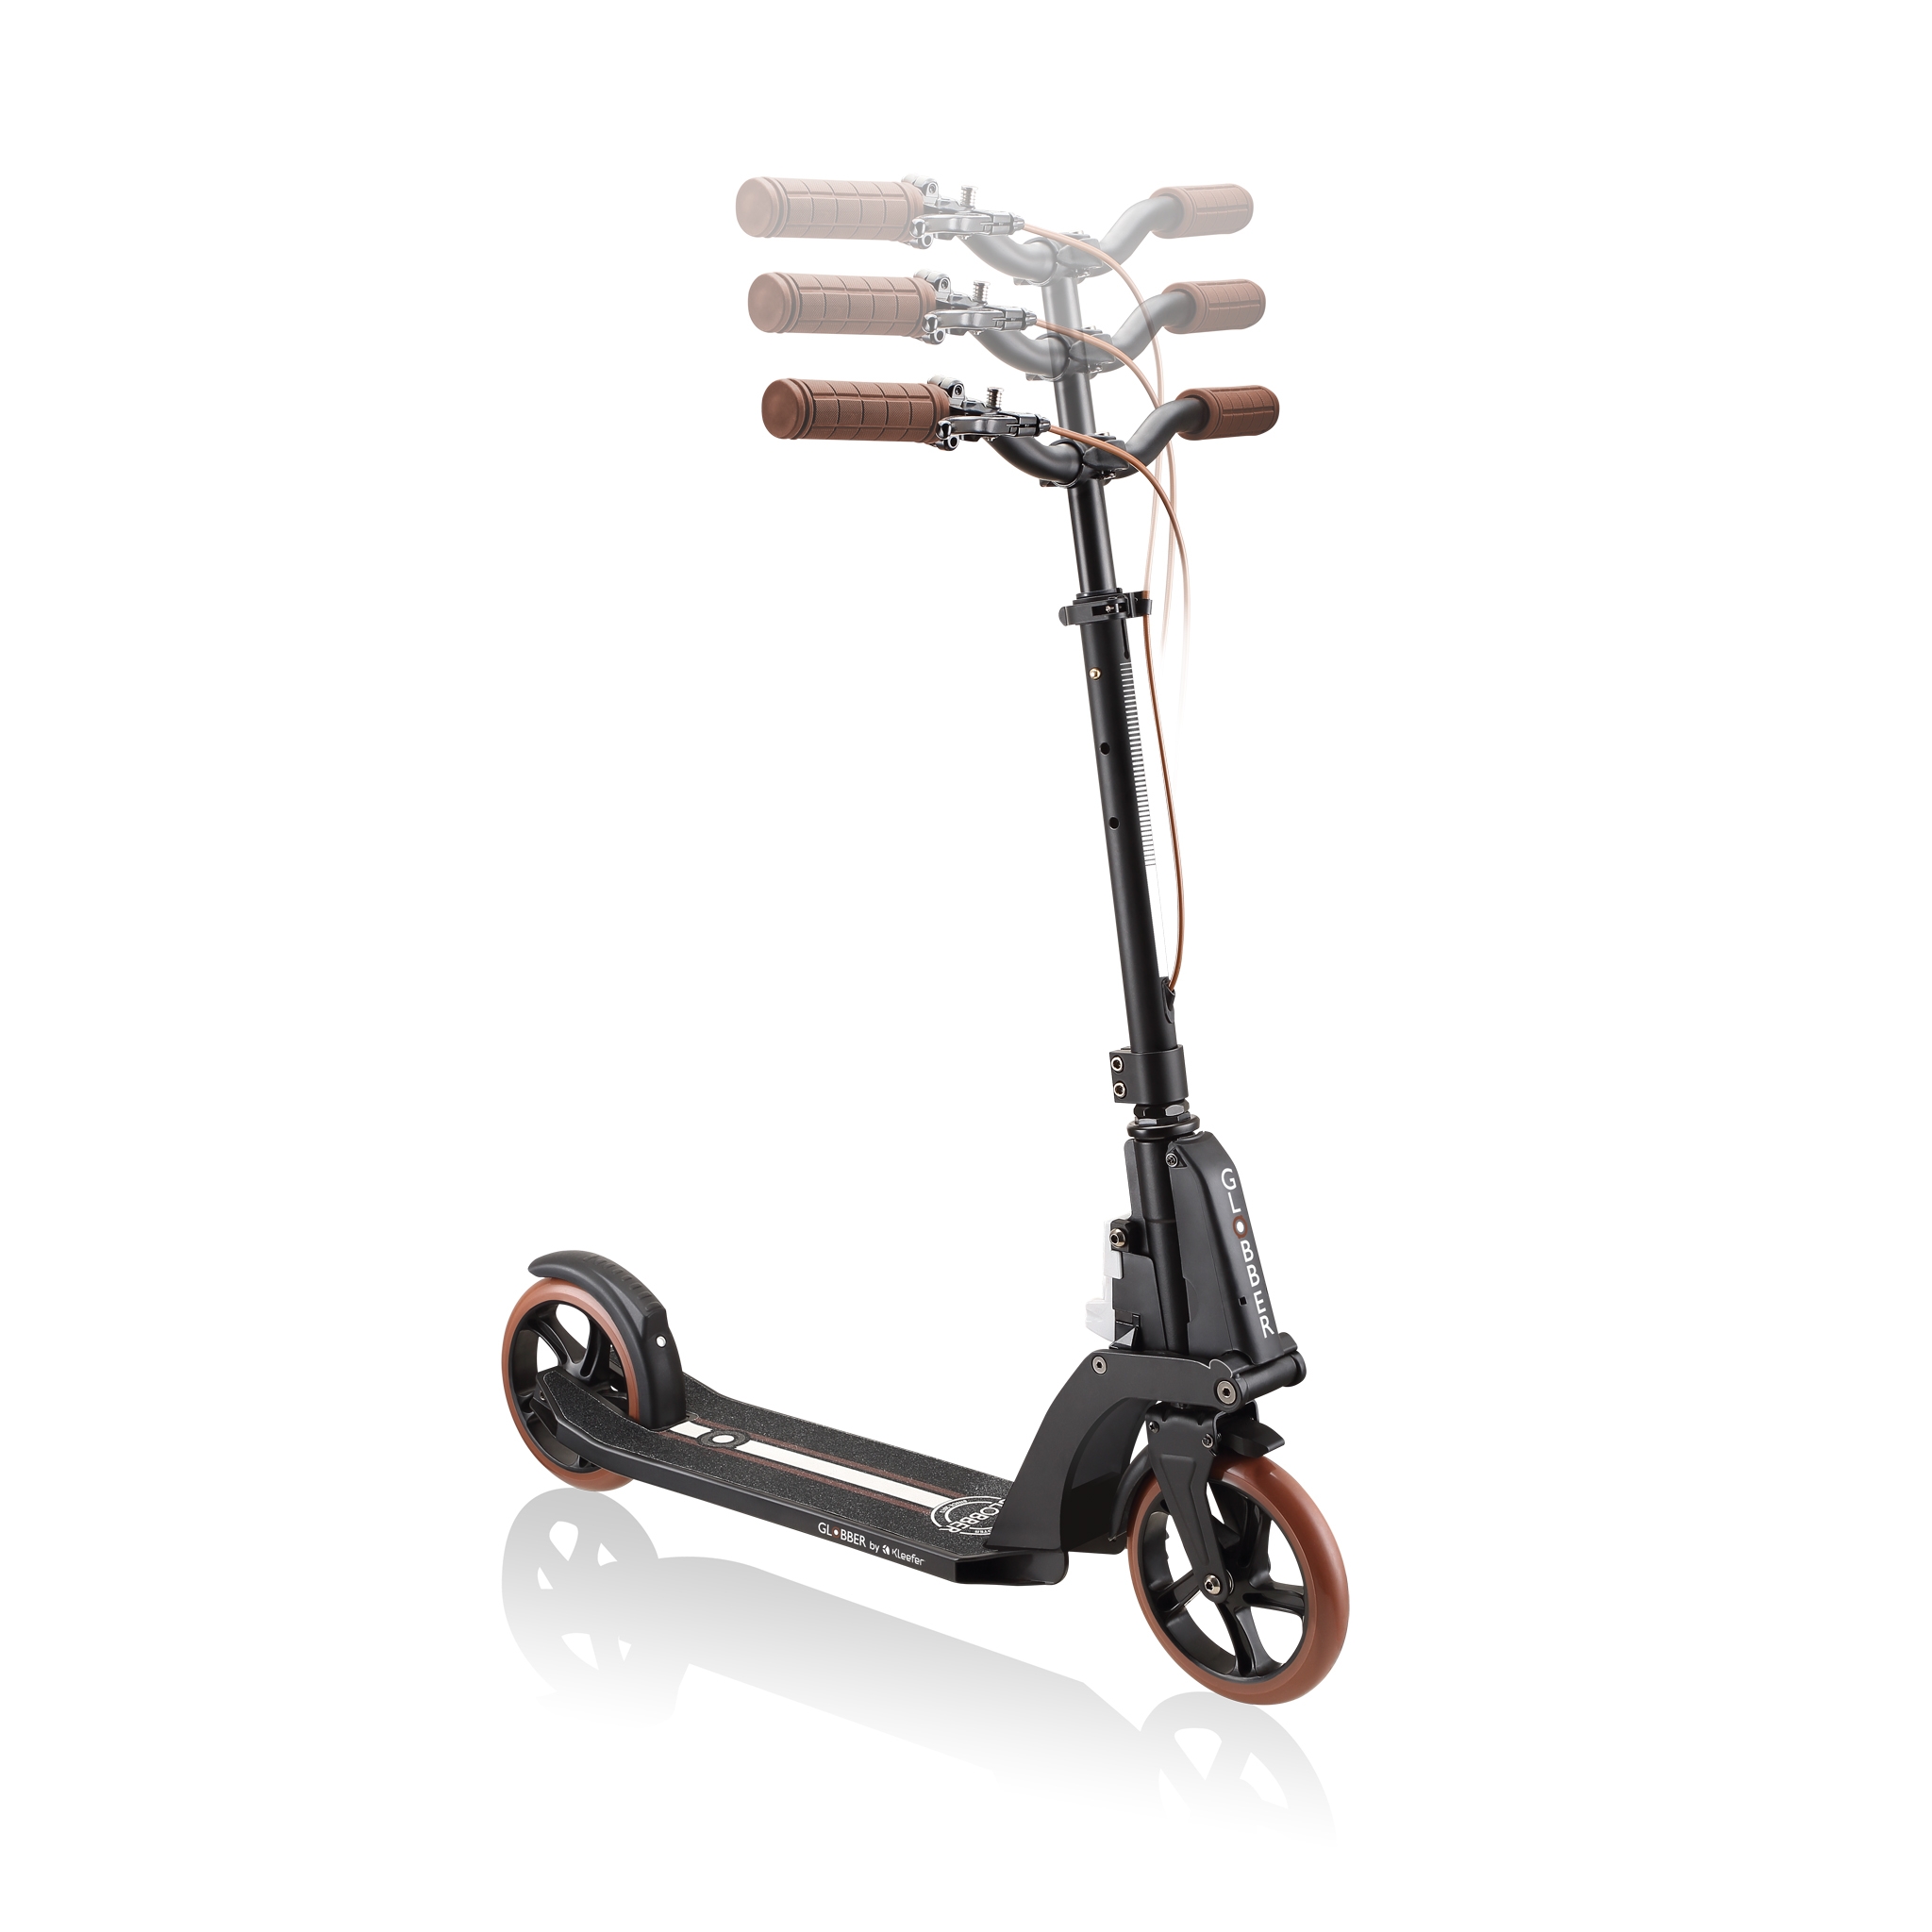 ONE-K-180-PISTON-DELUXE-adjustable-folding-scooter-for-adults 3